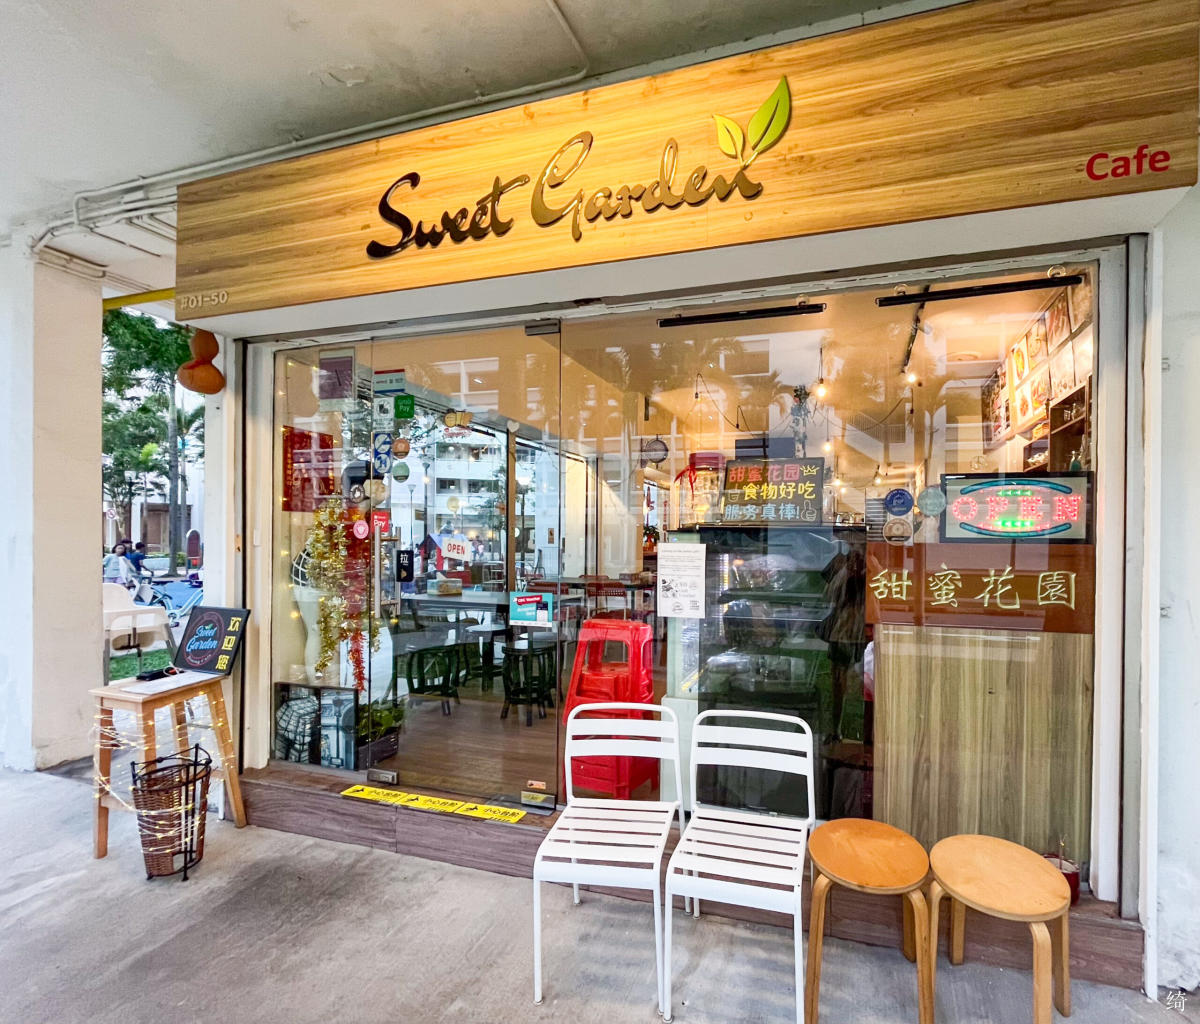 Sweet Garden Dining Cafe: No GST u0026 service charge at ex-5-star hotel chef's  Western cafe